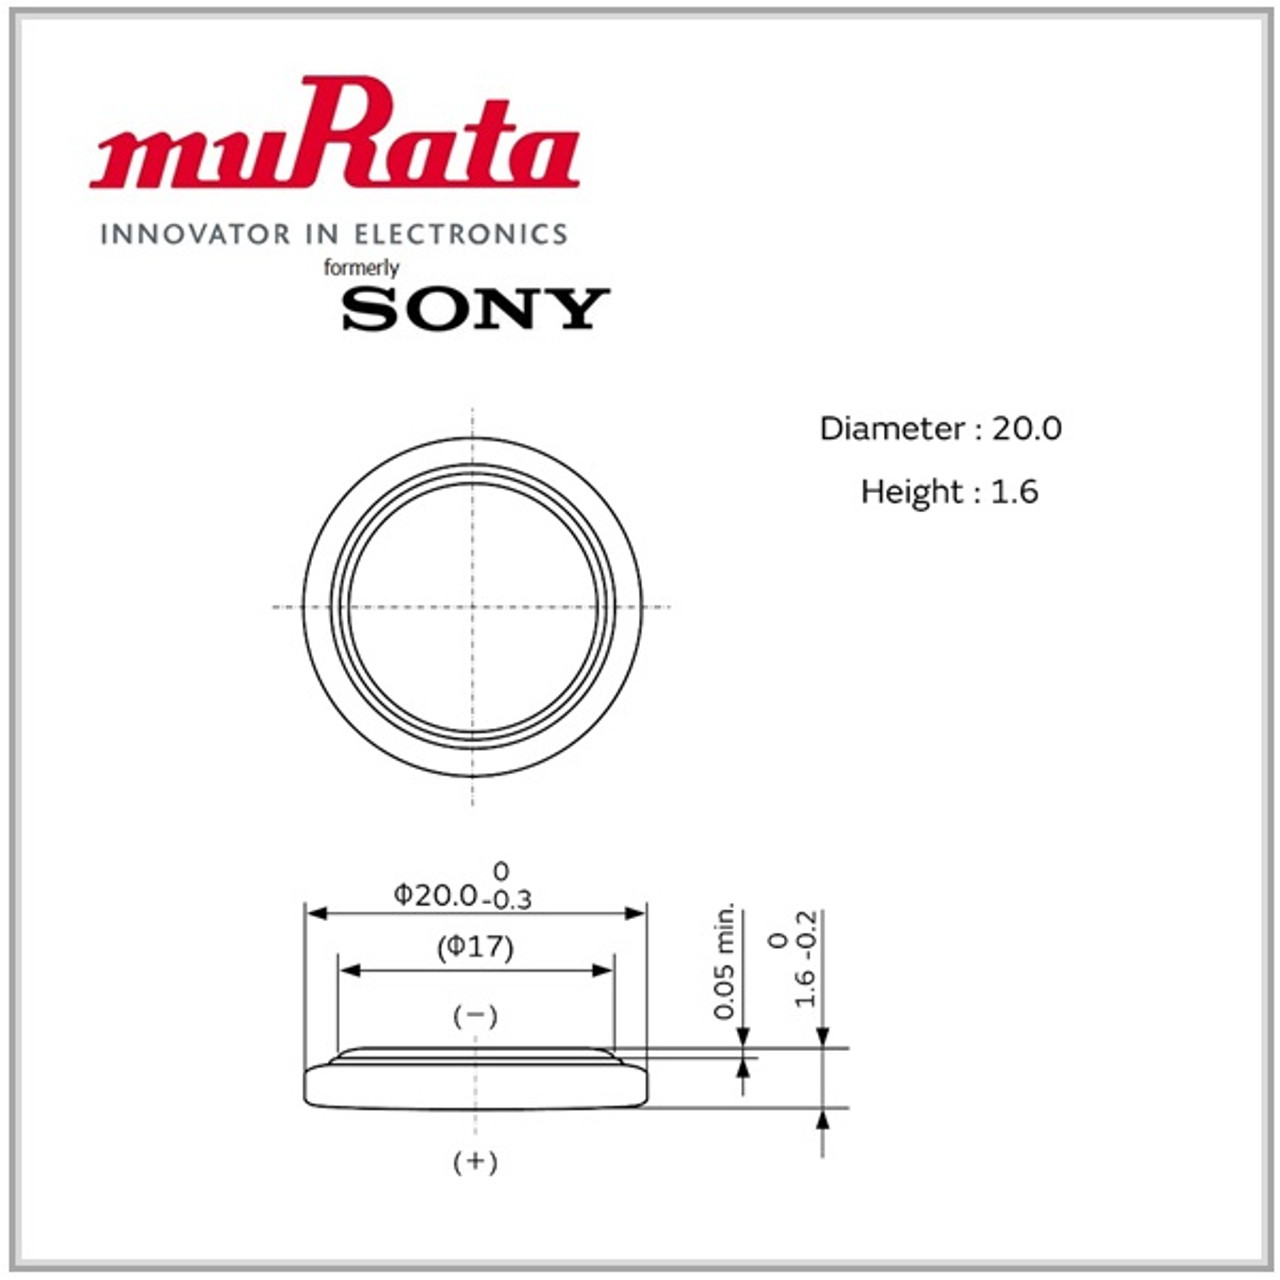 Murata CR2016 3V Lithium Coin Cell (5 Batteries) - Replaces Sony CR2016